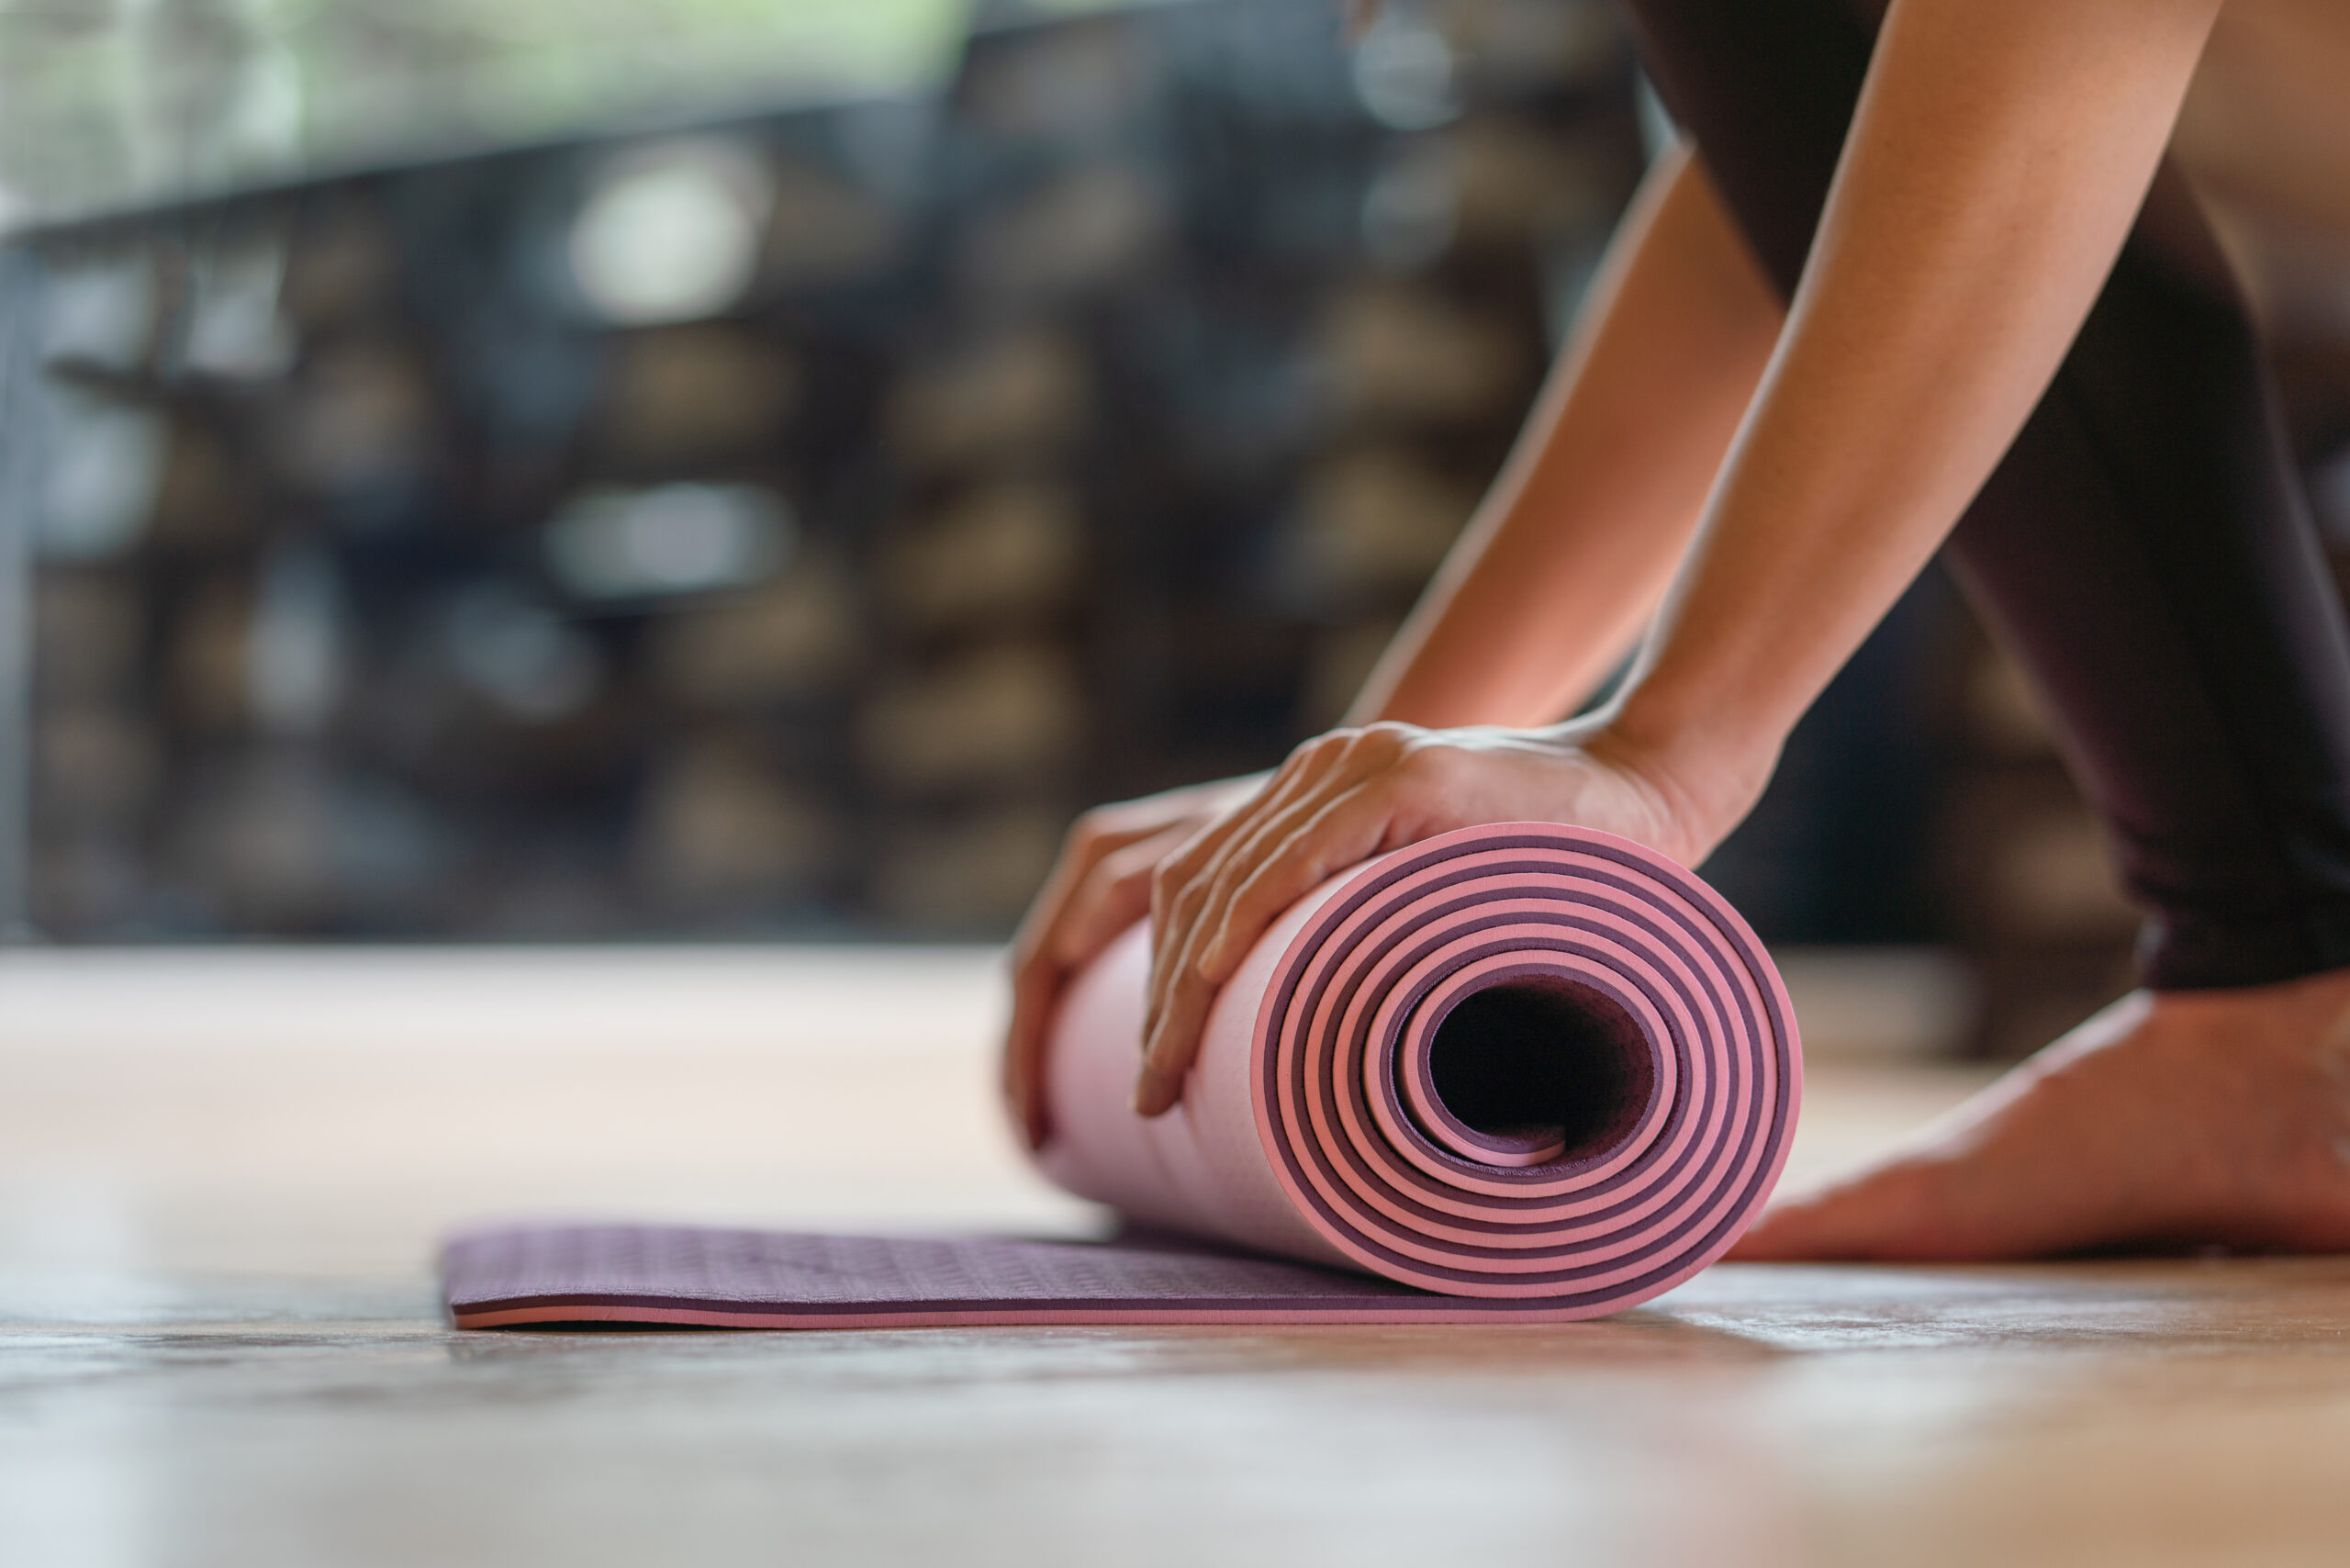 Kansas Built Fitness | Mind & Body classes featuring Yoga and Pilates in Olathe, KS | Pink yoga mat being rolled up by hands